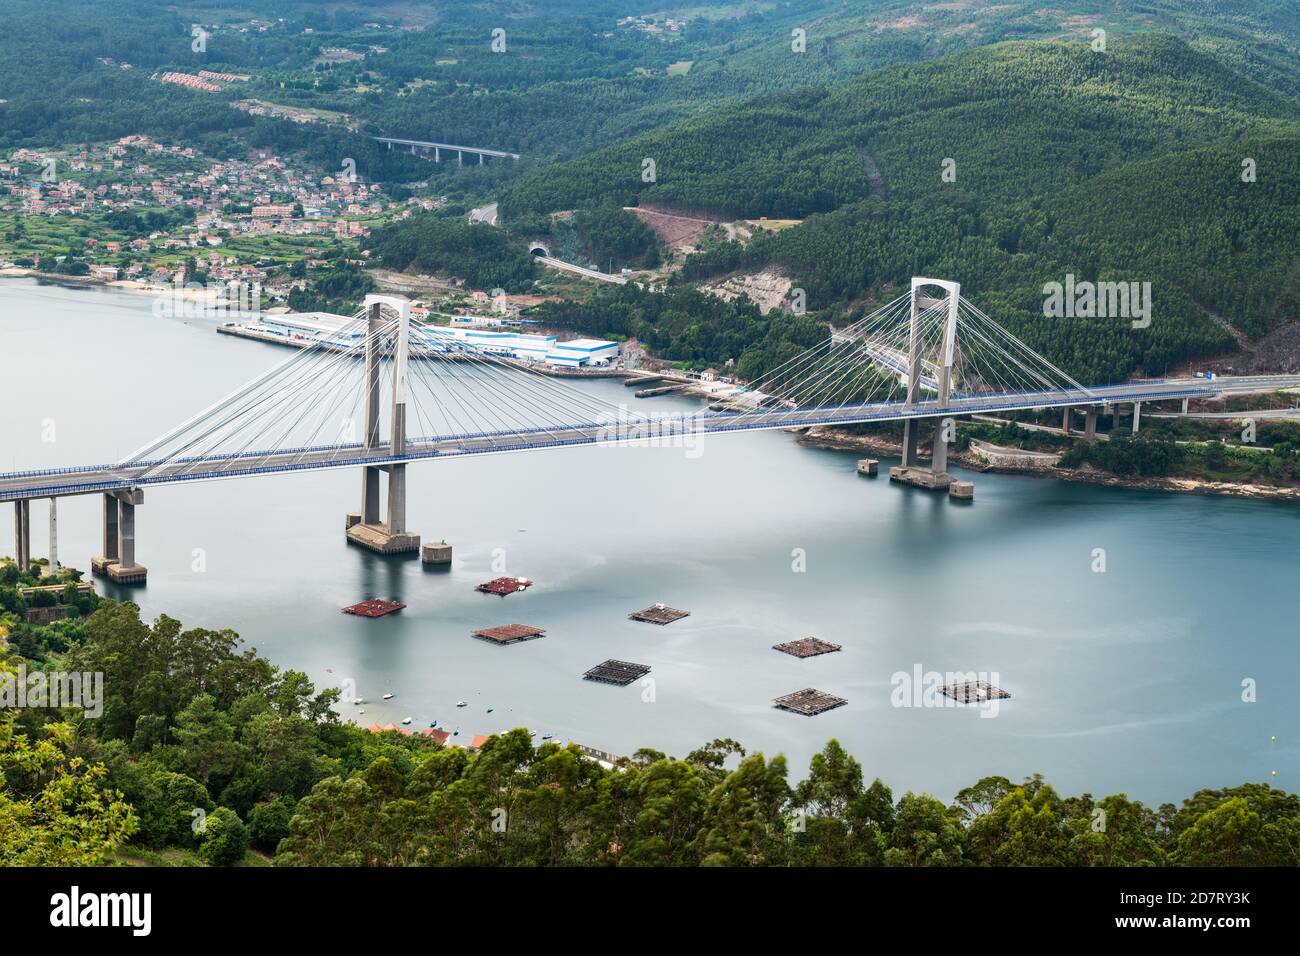 Aerial view of the recently extended Rande bridge crossing over the Ria the Vigo. Long exposure. Stock Photo